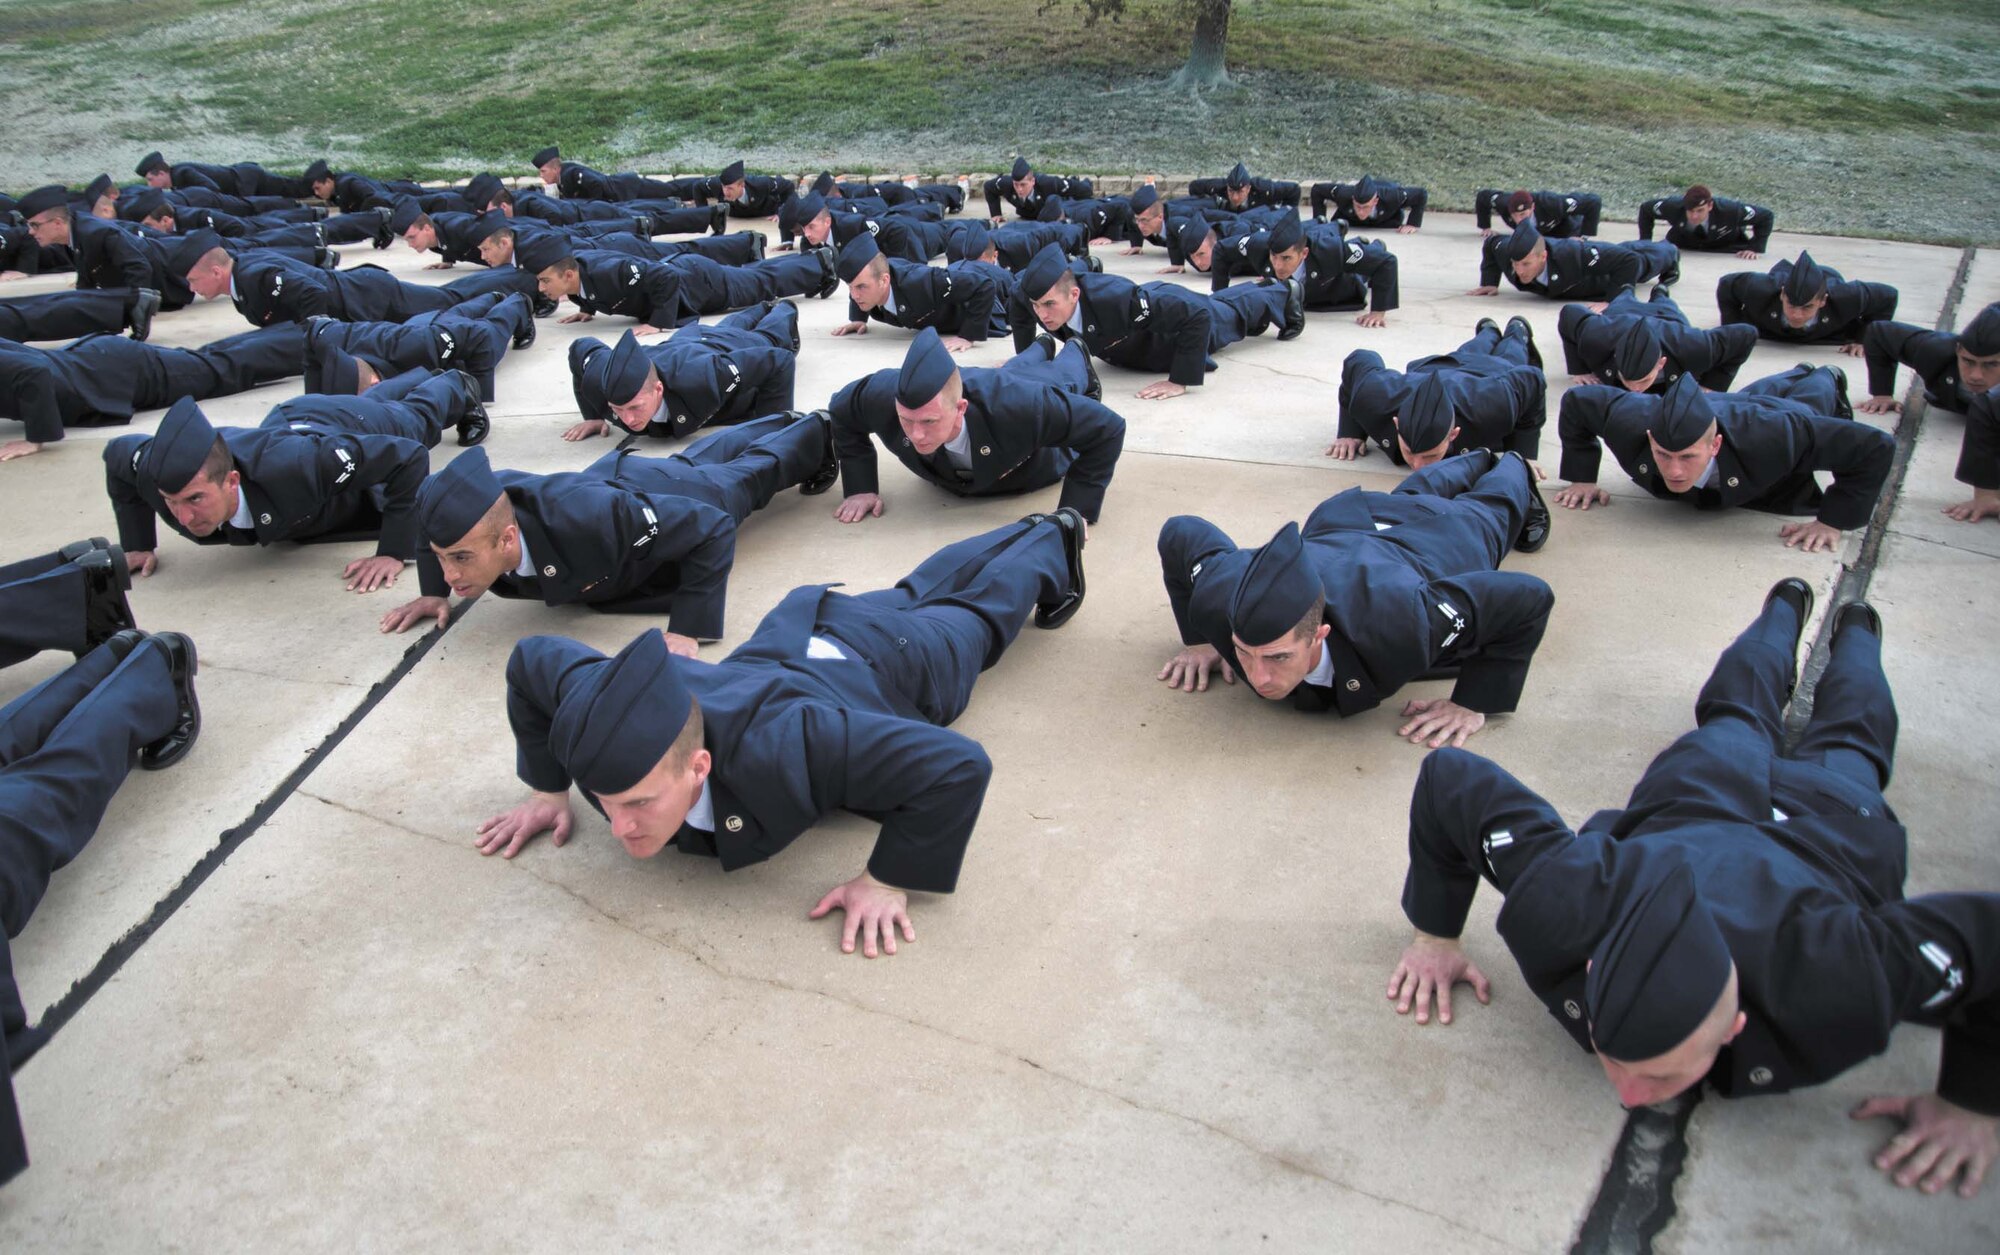 Pararescuemen, combat controllers and Pararescue Indoctrination Course trainees perform “memorial push-ups” during the memorial unveiling ceremony honoring Staff Sgt. Scott D. Sather Jan. 20 at the Joint Base San Antonio-Lackland Training Annex. Sather, a combat controller, was the first U.S. Air Force combat casualty during Operation Iraqi Freedom. Created by Air Force civil engineers, Sather’s memorial was displayed at Sather Air Base, near Baghdad International Airport, until its arrival here in October 2011. Sather AB has since transitioned from Air Force ownership and now falls under the Department of State as Sather Logistics Hub. (U.S. Air Force photo/Senior Airman Marleah Miller)